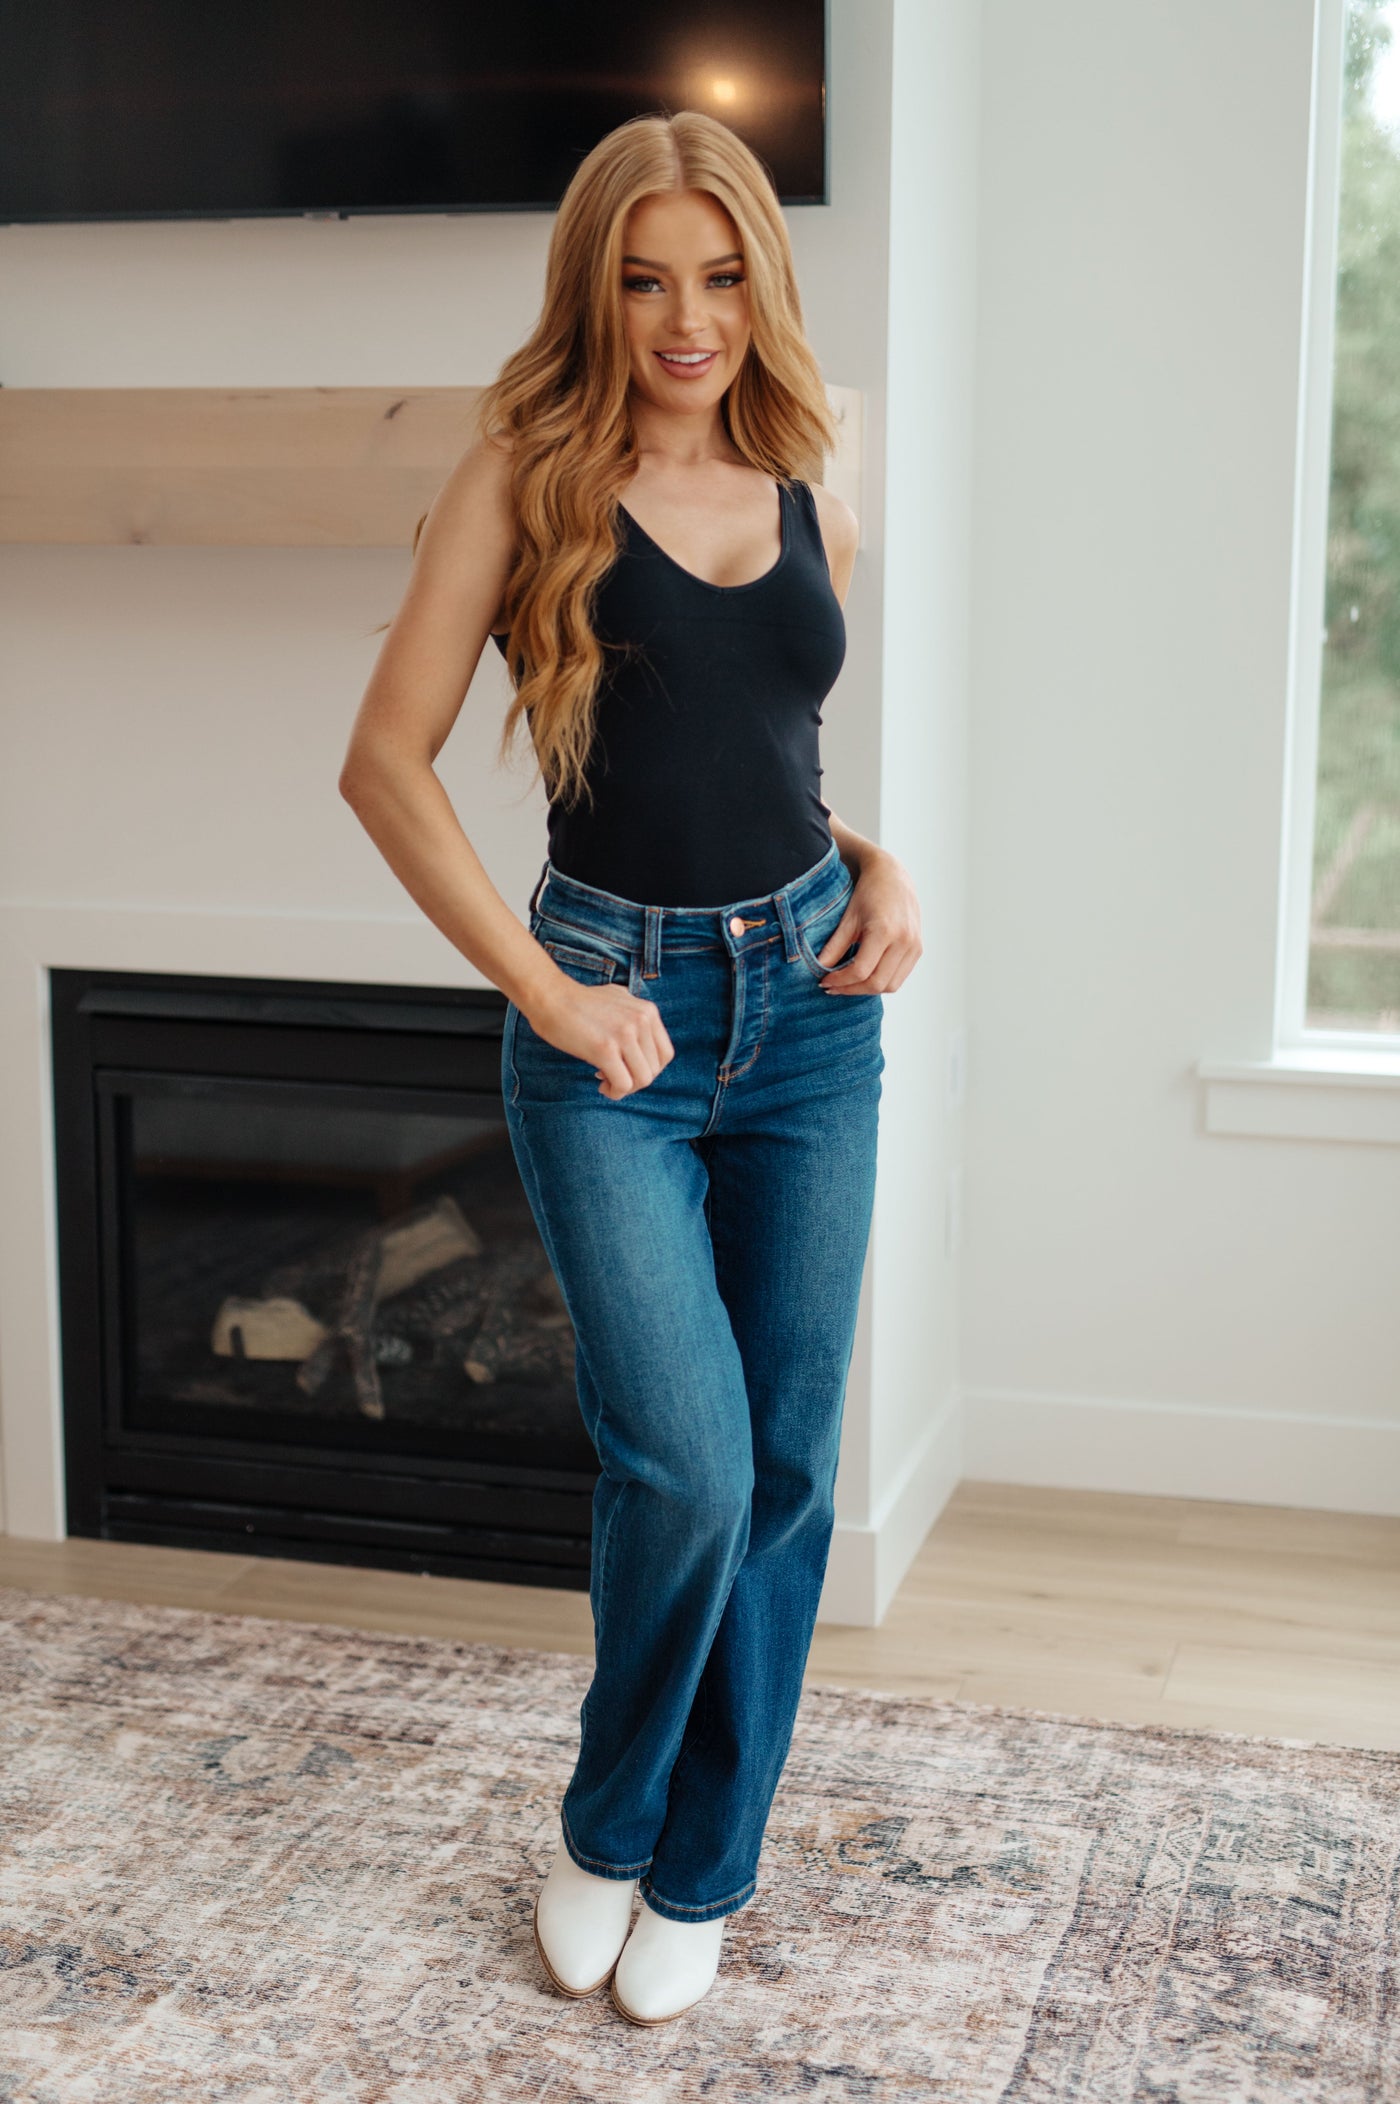 Sleek and stylish, they feature a high waist, hidden button fly, straight silhouette, a medium wash, and 4-way stretch for maximum comfort. Ready to take your look up a notch? Choose Pippa